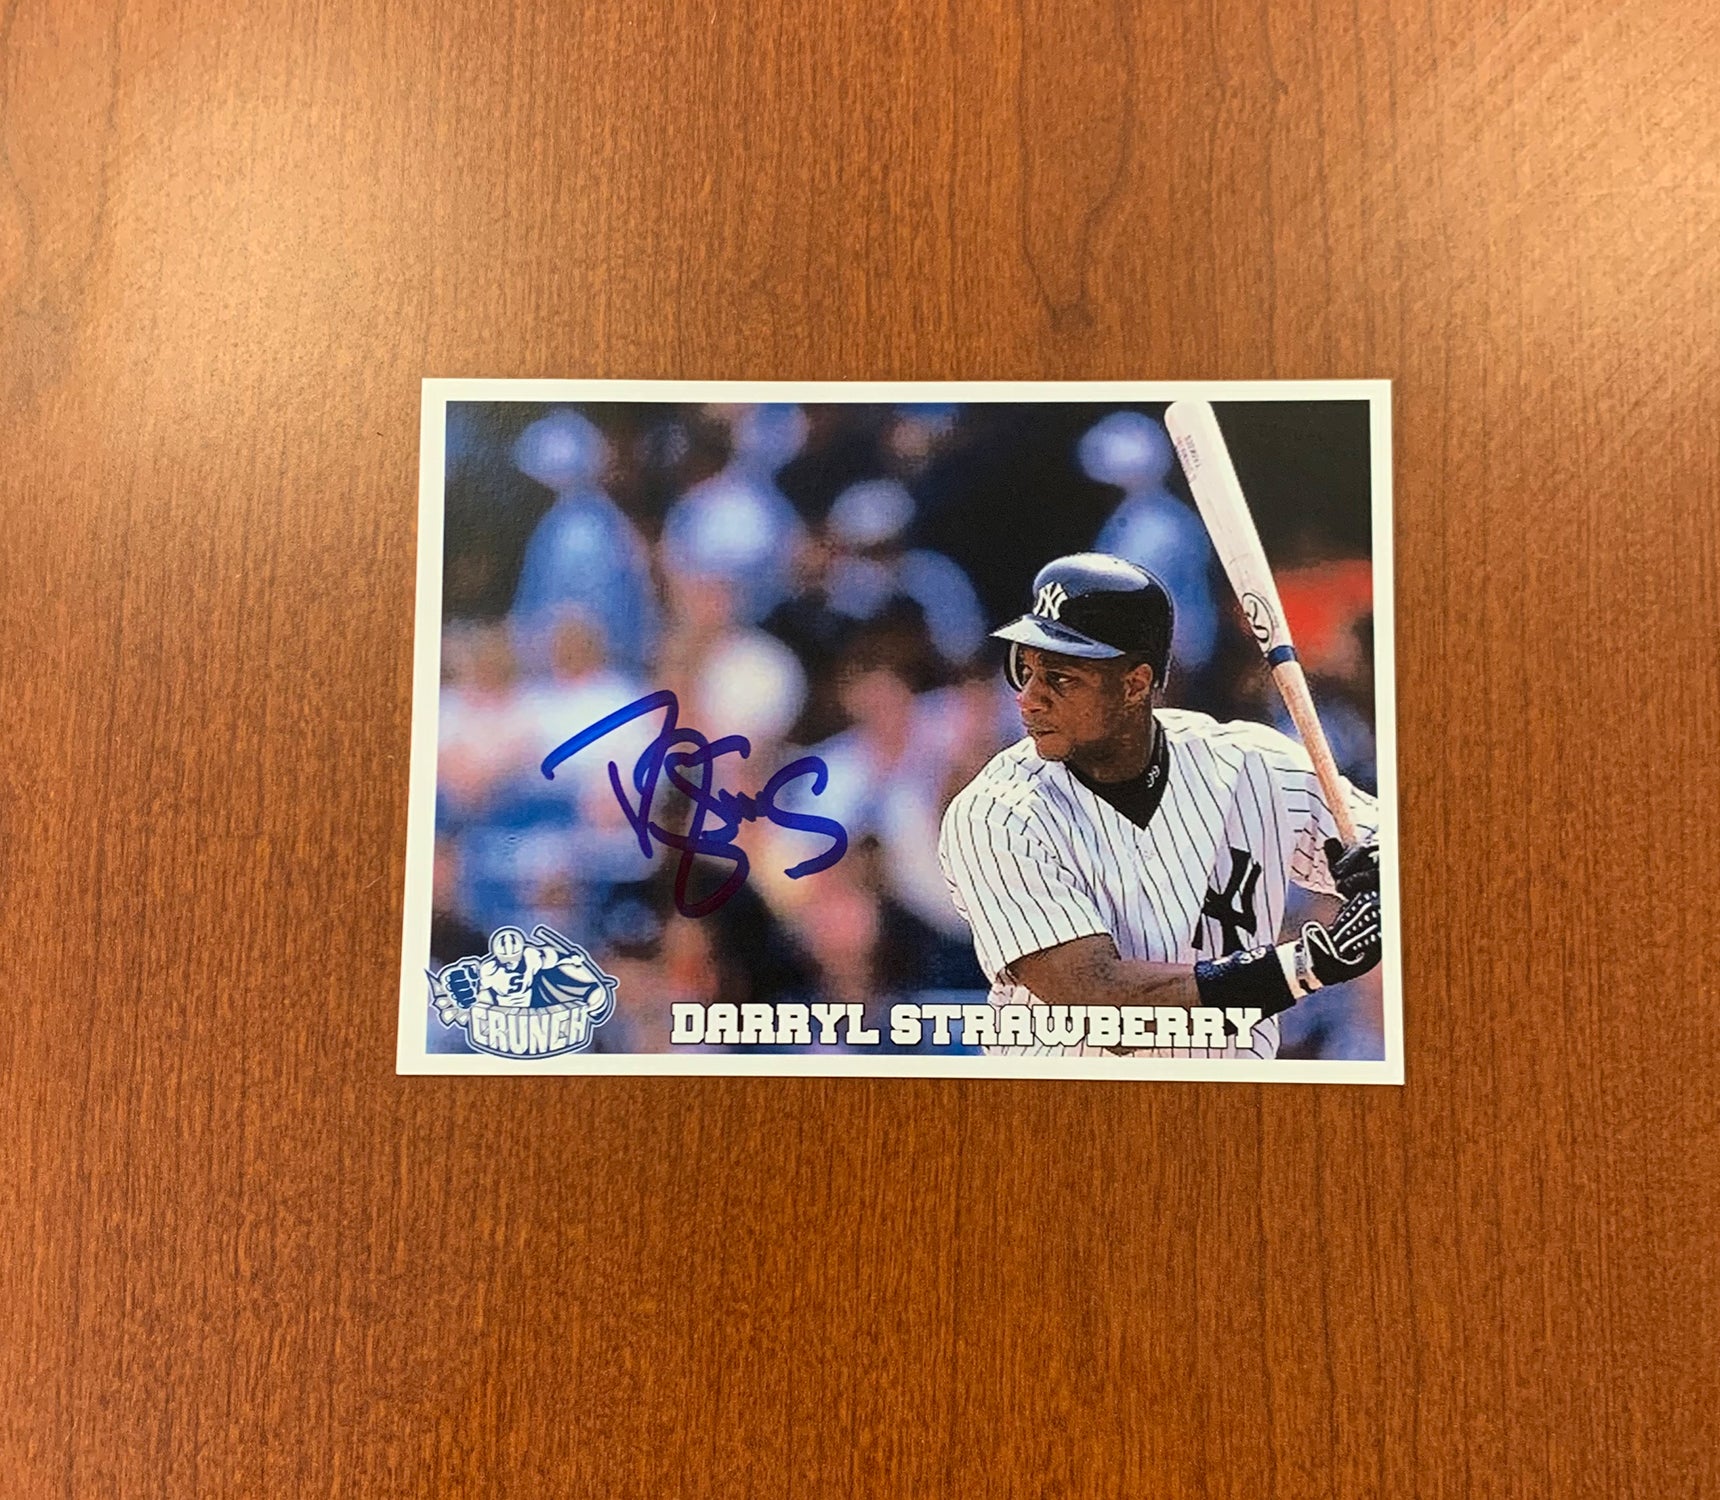 Darryl Strawberry Autographed Photo – Syracuse Crunch Official Team Store